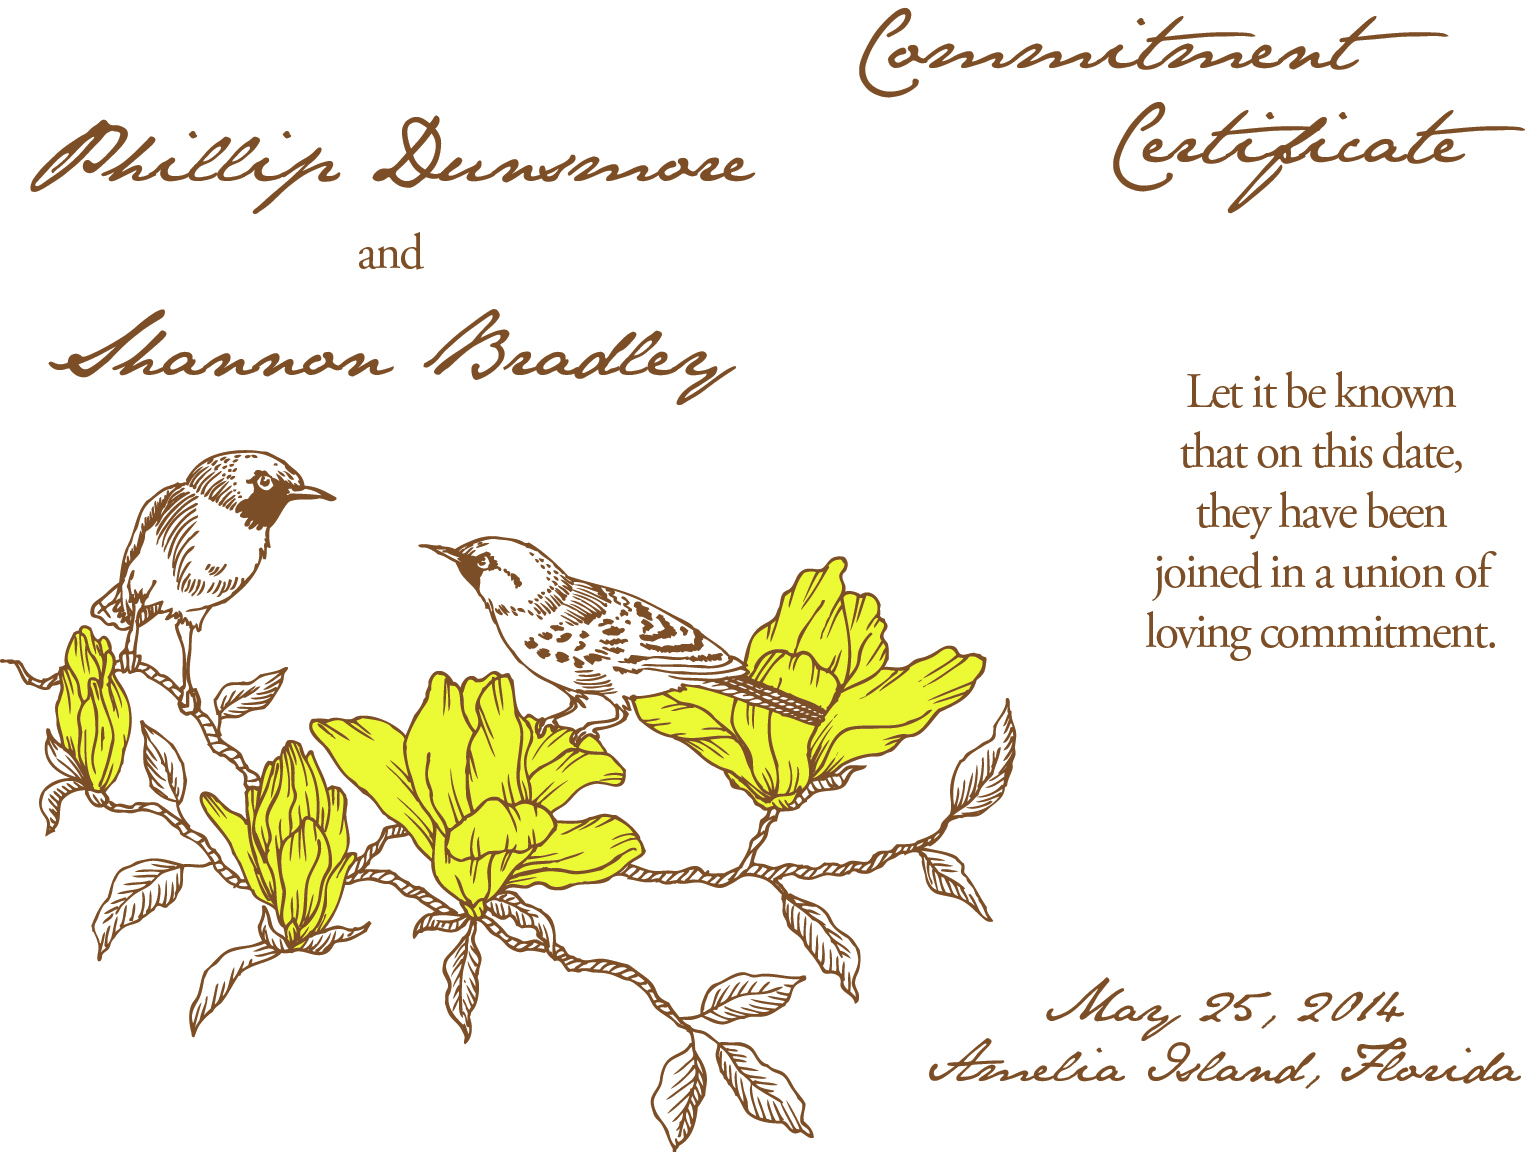 Commitment Ceremony Certificate Design Choices-That Wedding Lady - Commitment Certificate Free Printable